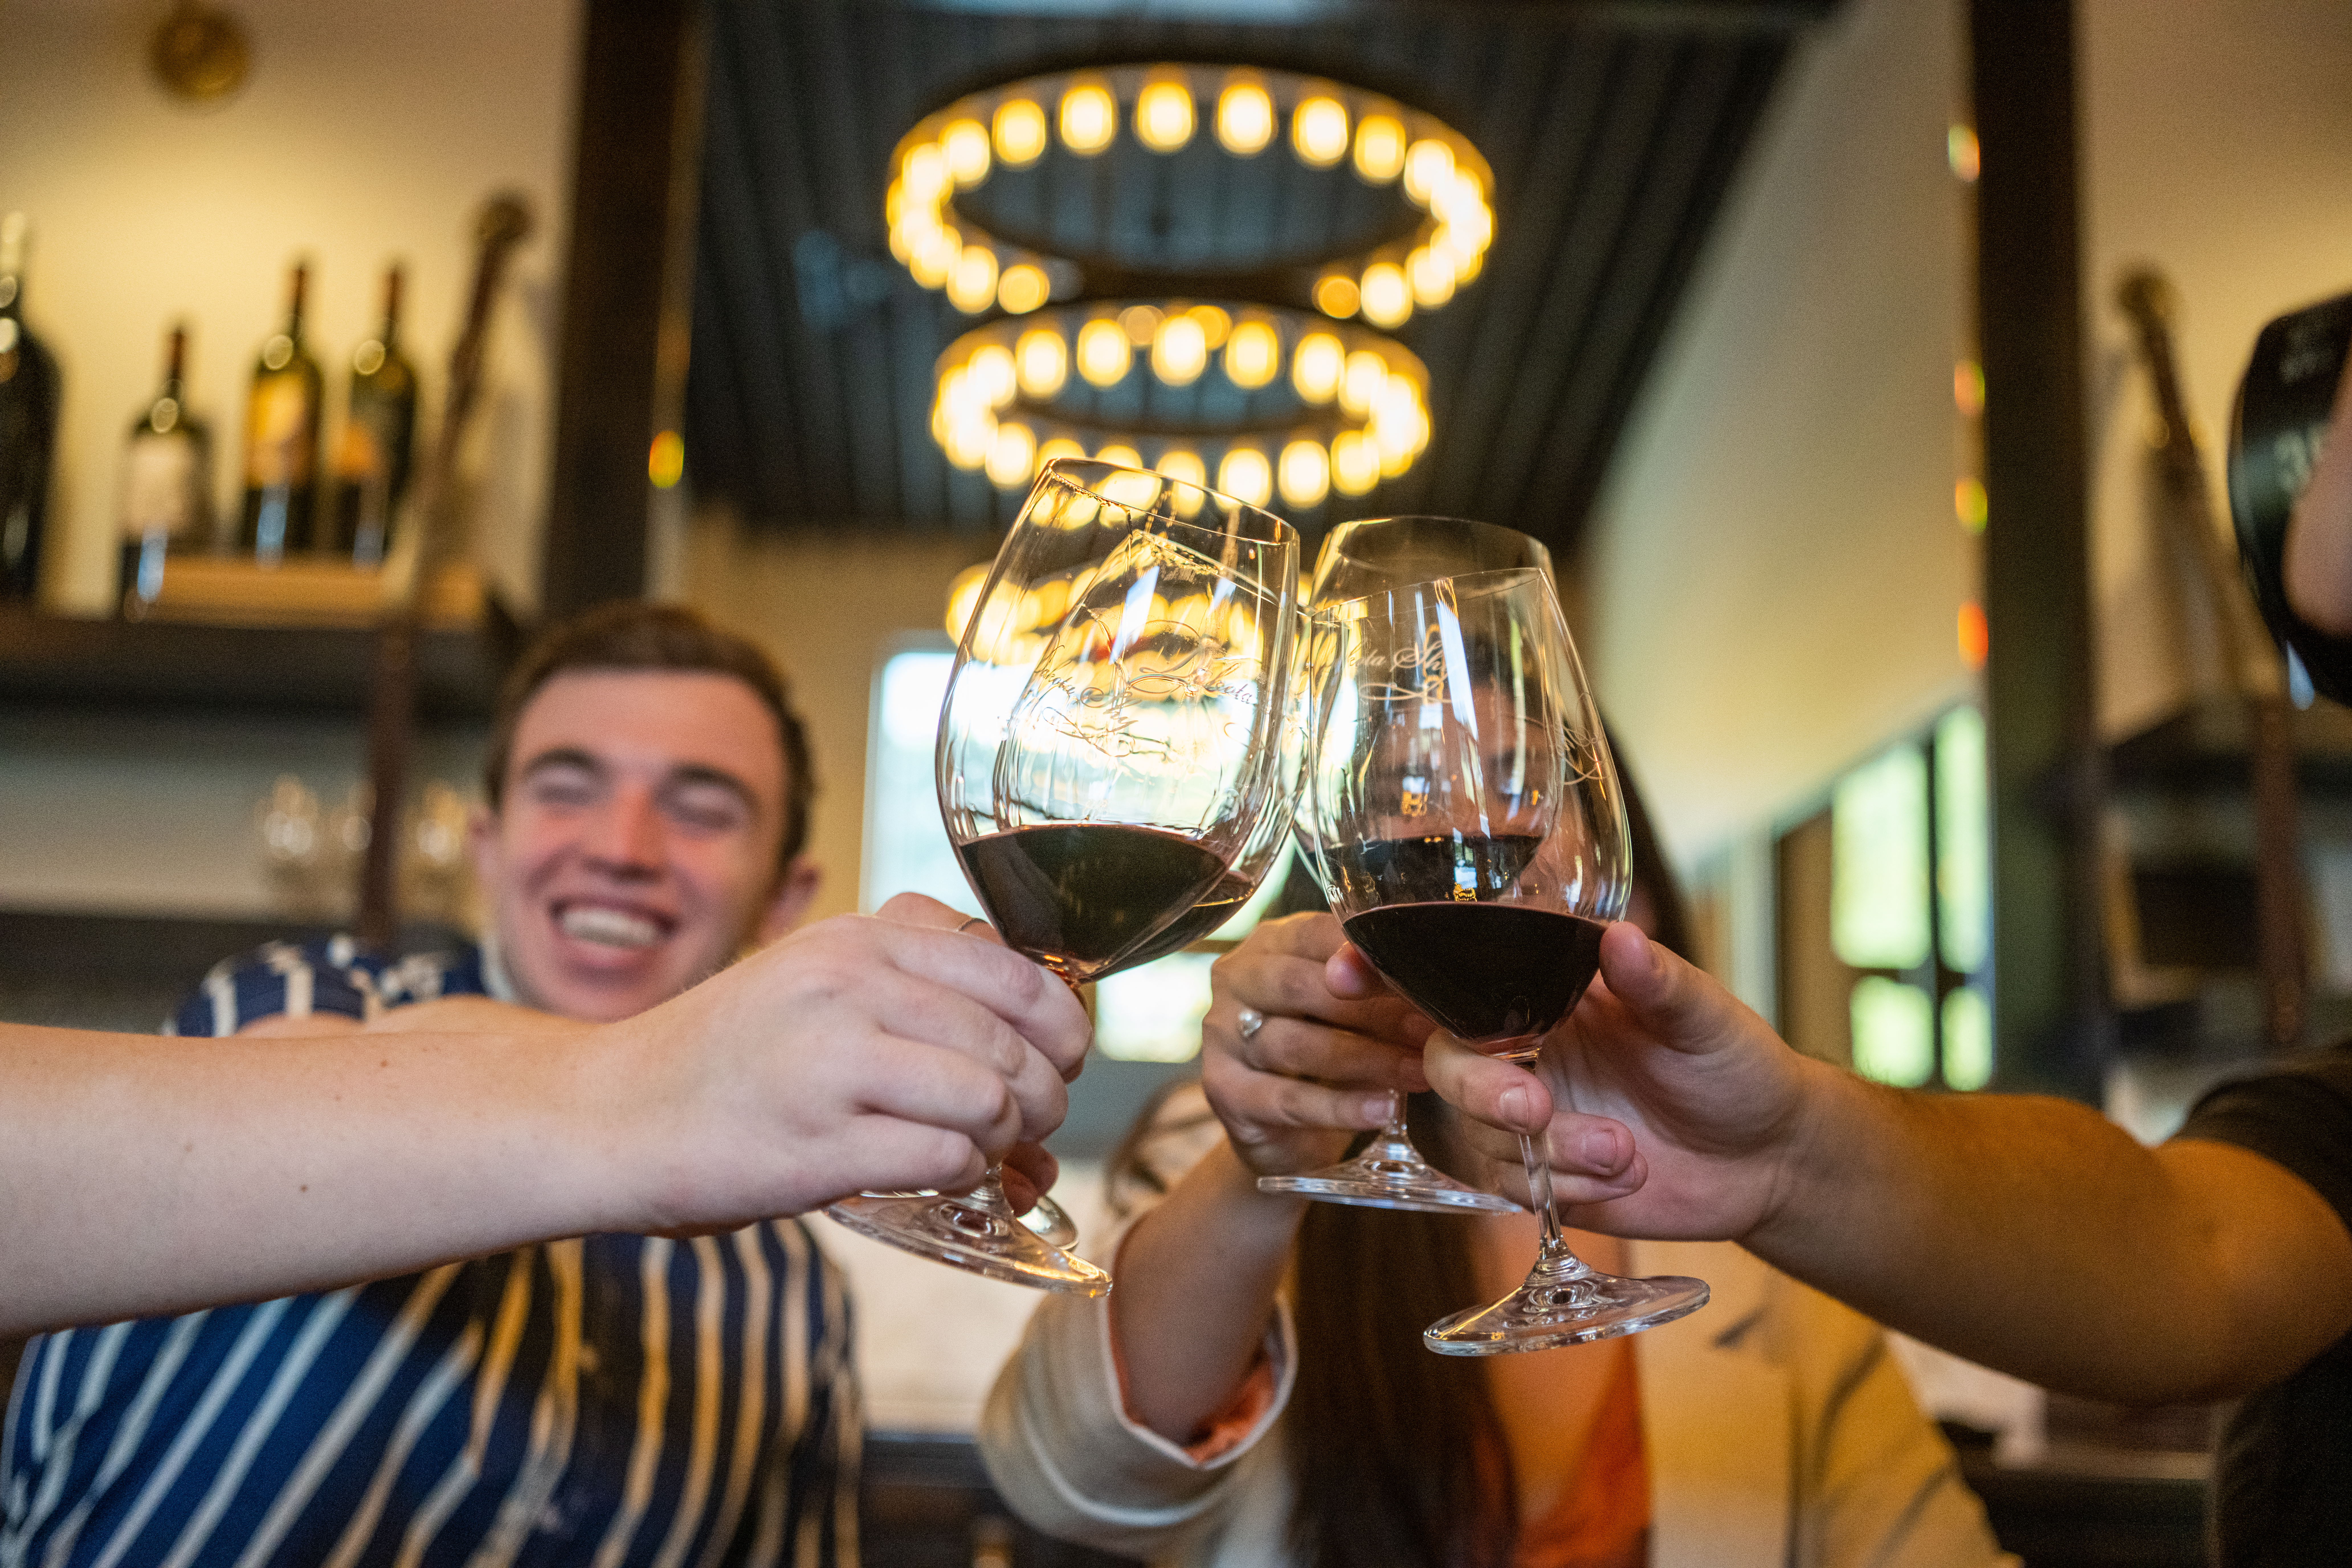 People cheers-ing their wine glasses in a winery.